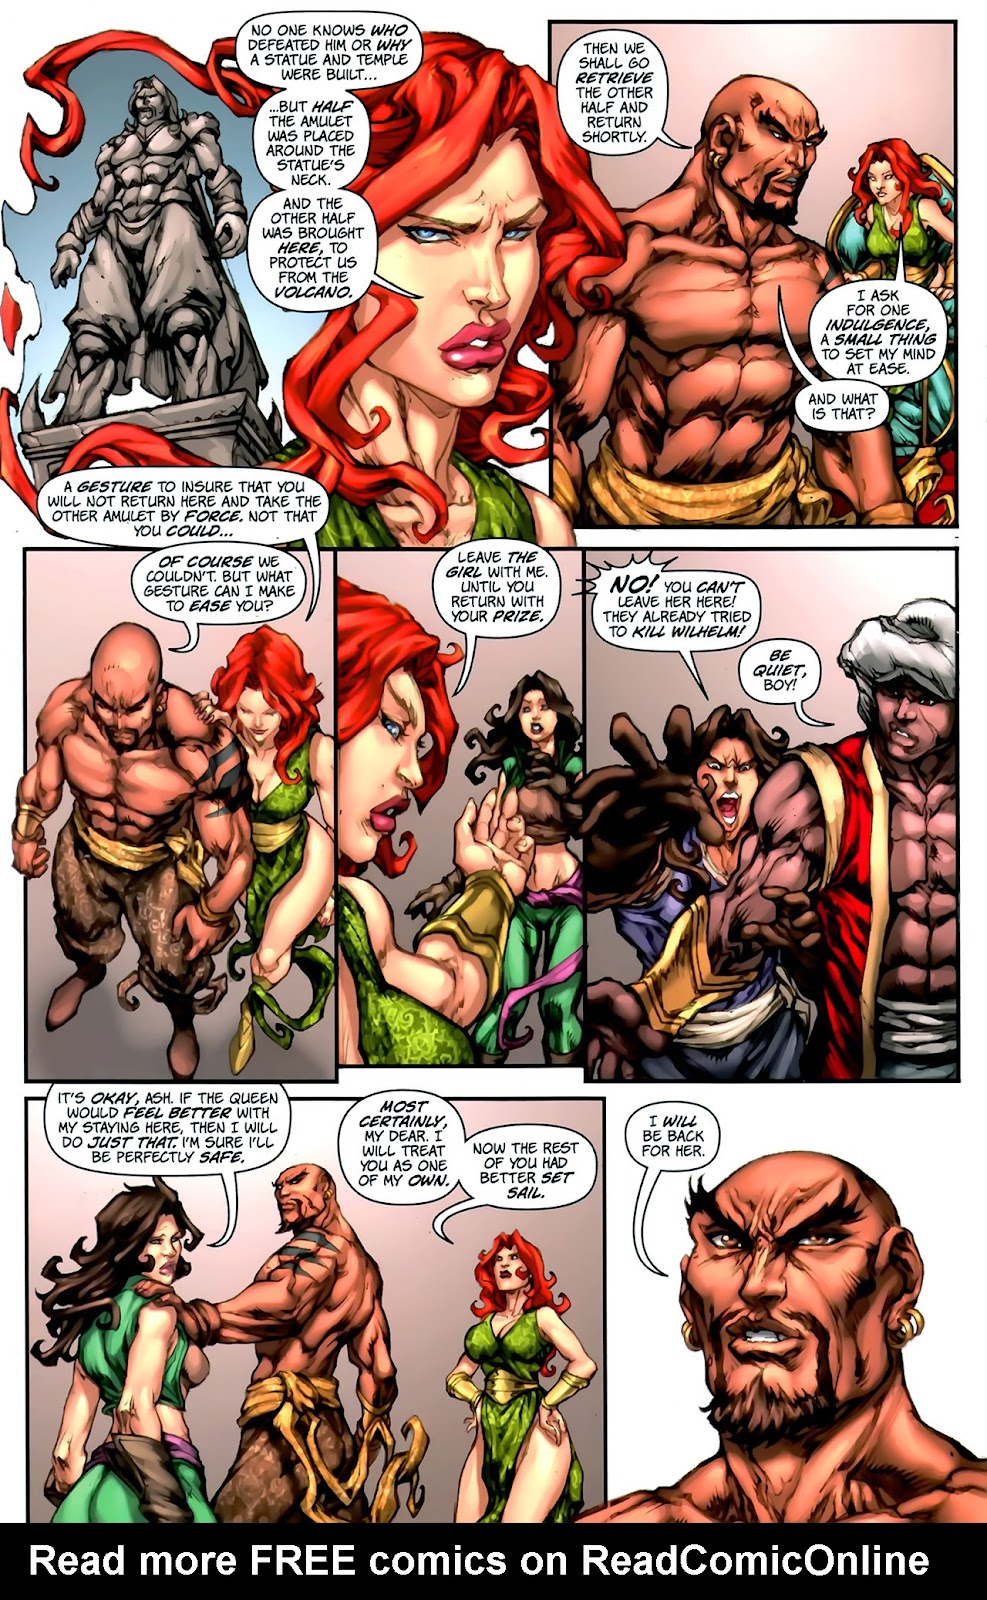 1001 Arabian Nights: The Adventures of Sinbad issue 2 - Page 18